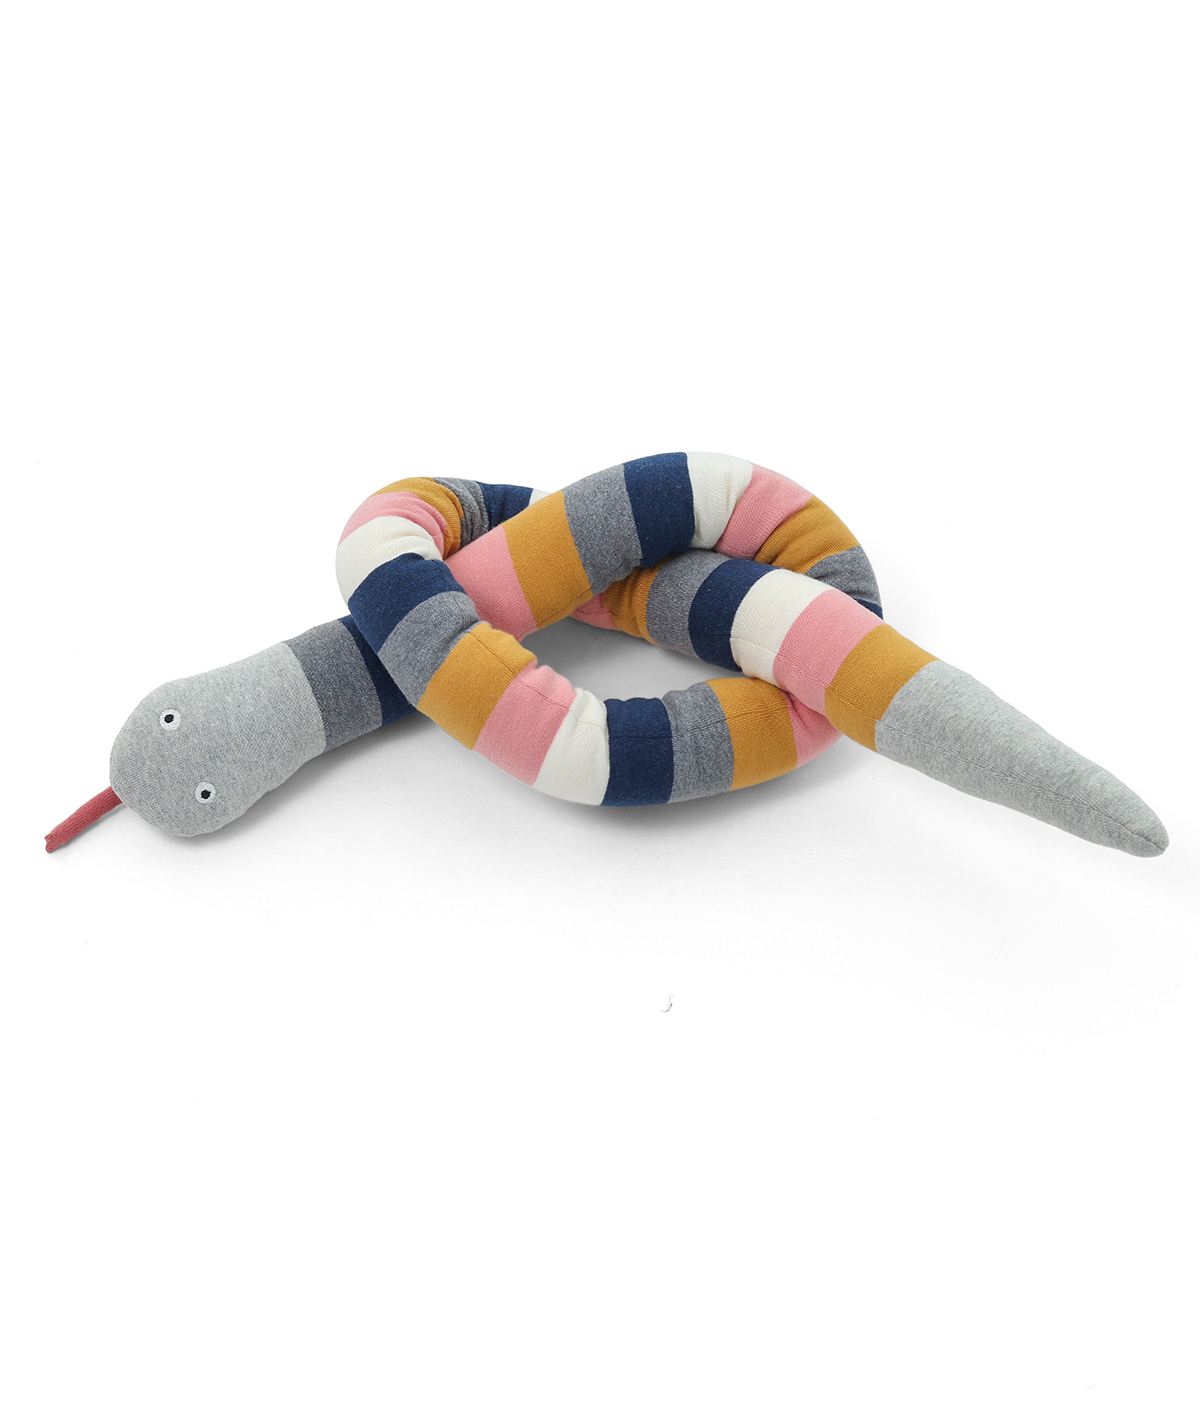 Bella Snake Cotton Knitted Stuffed Soft Toy (Multi Color)